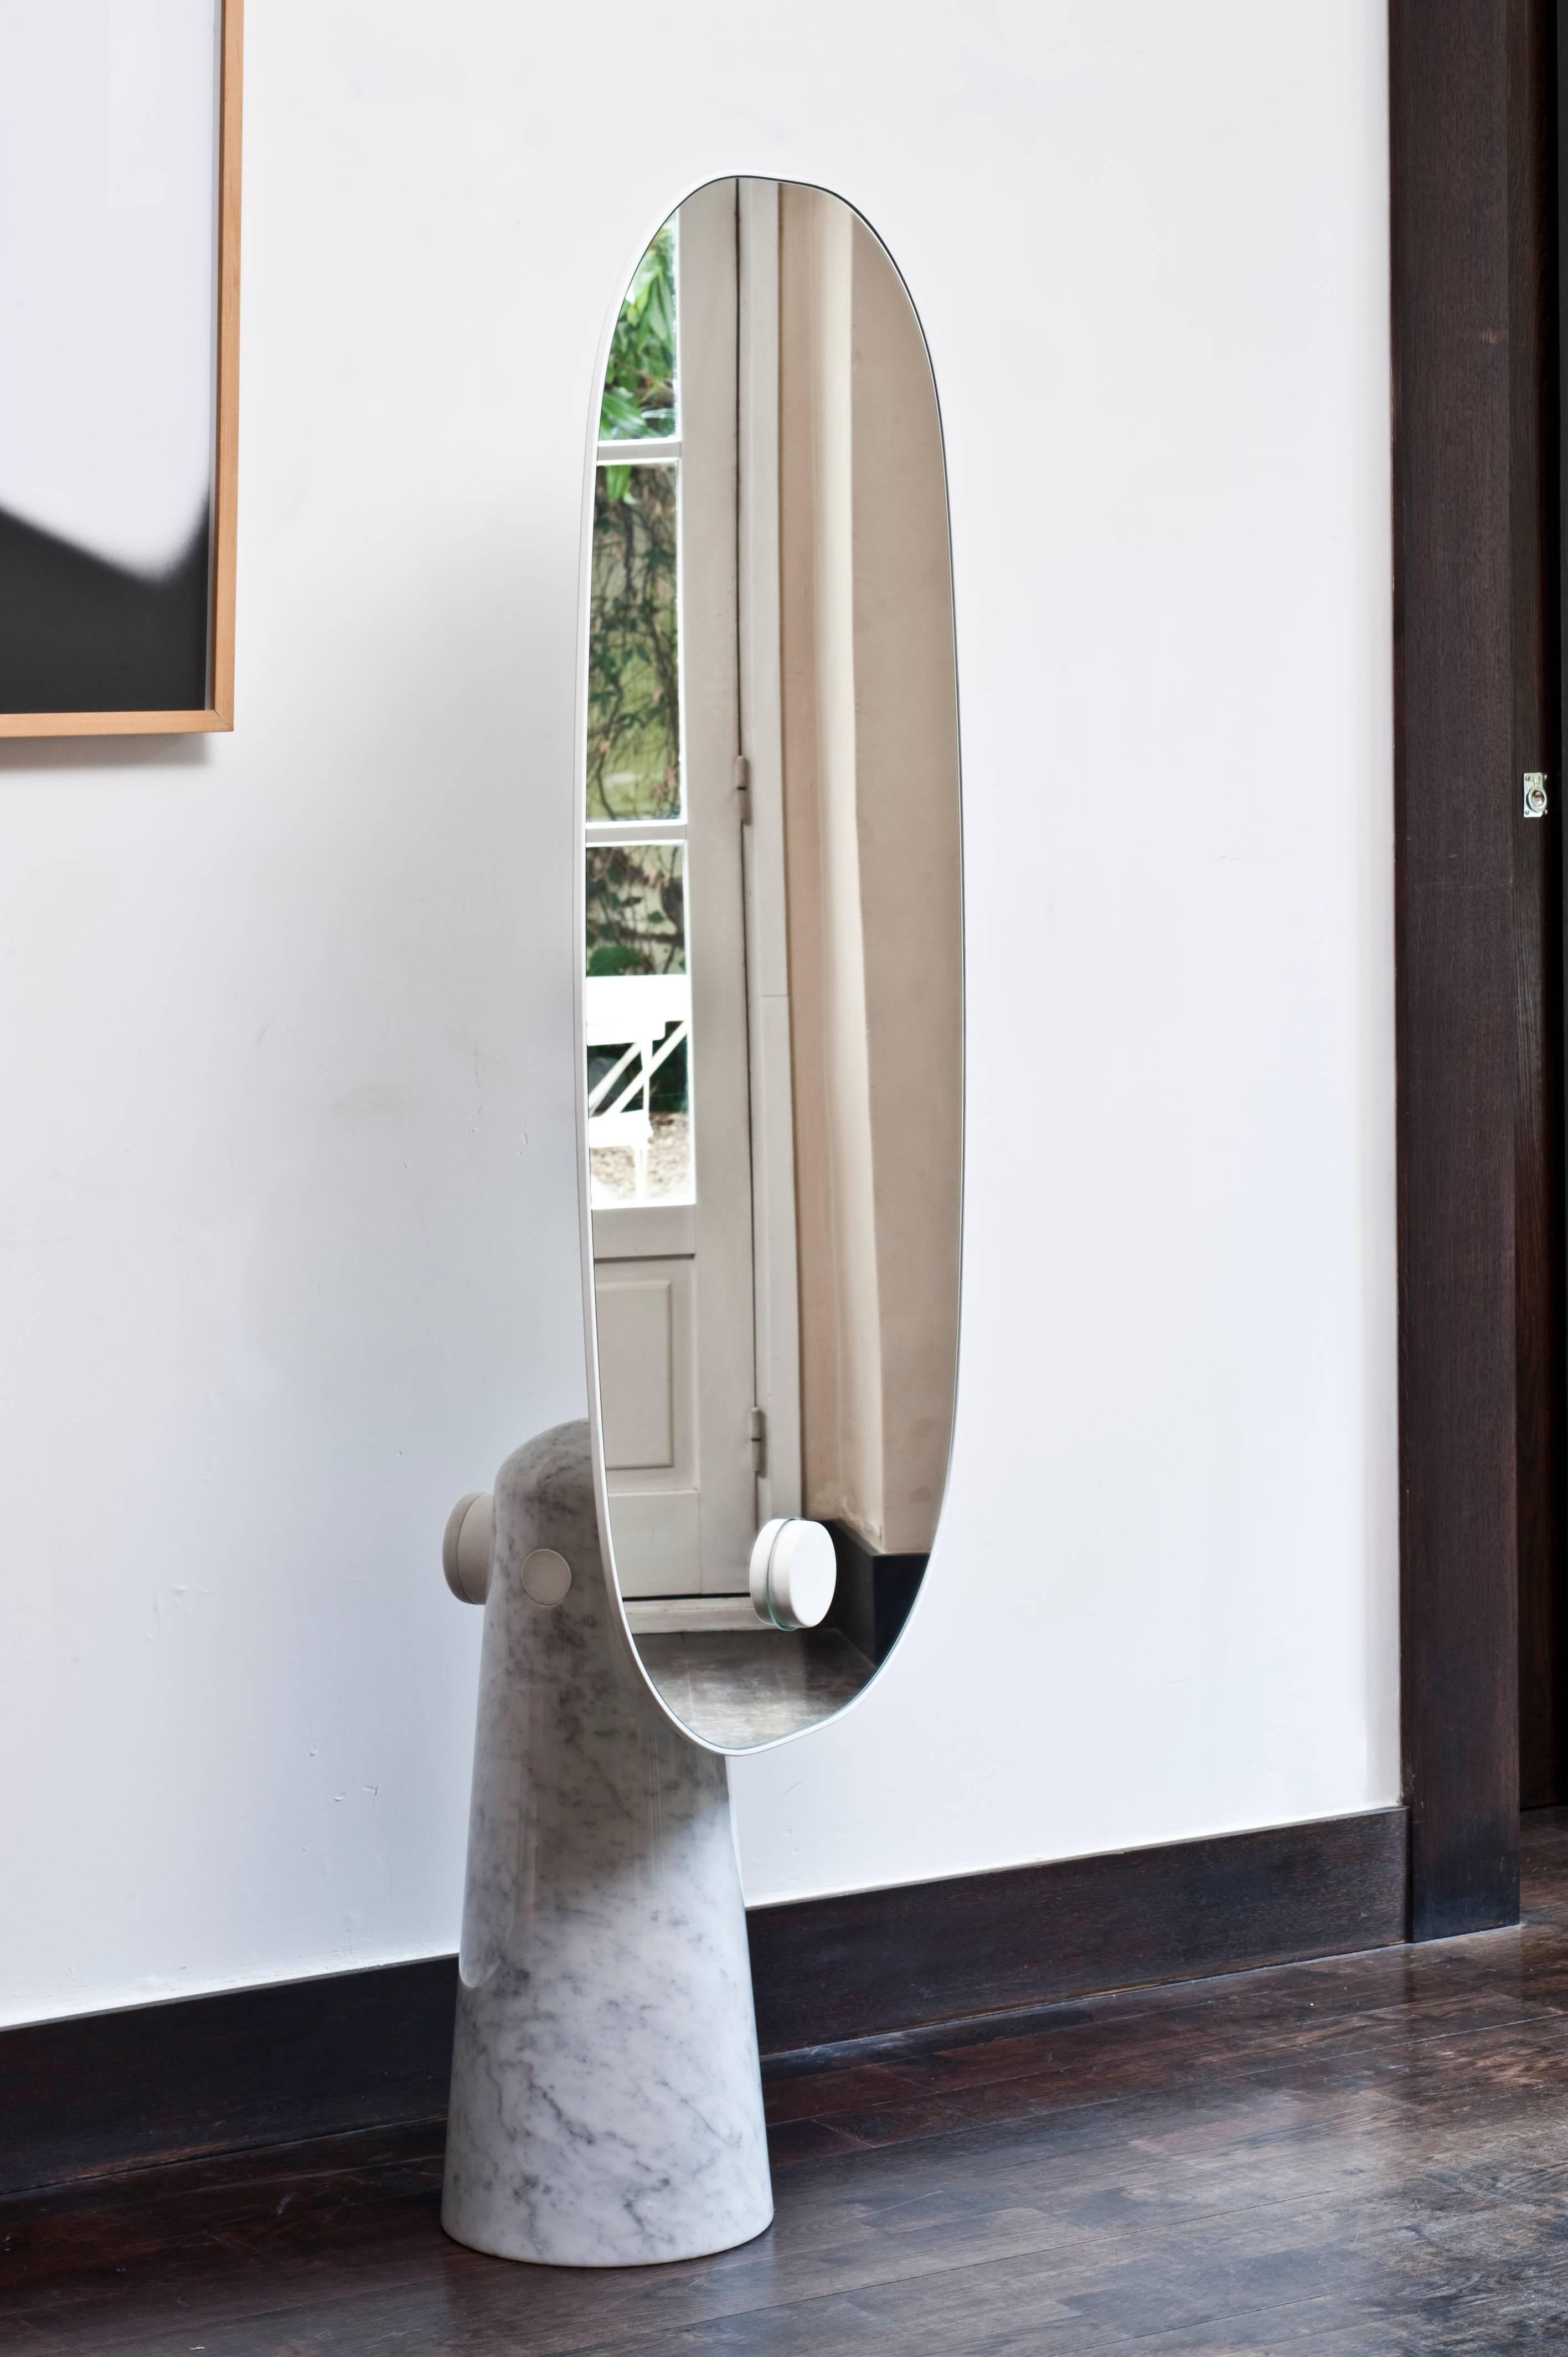 Iconic is a mirror that stands as a statue. The wood pedestal contrasts with the thickness of the mirror it supports. The metal cylinder sealed to the base makes the structure literally cross the mirror.

Dimensions, volume and weight
Height: